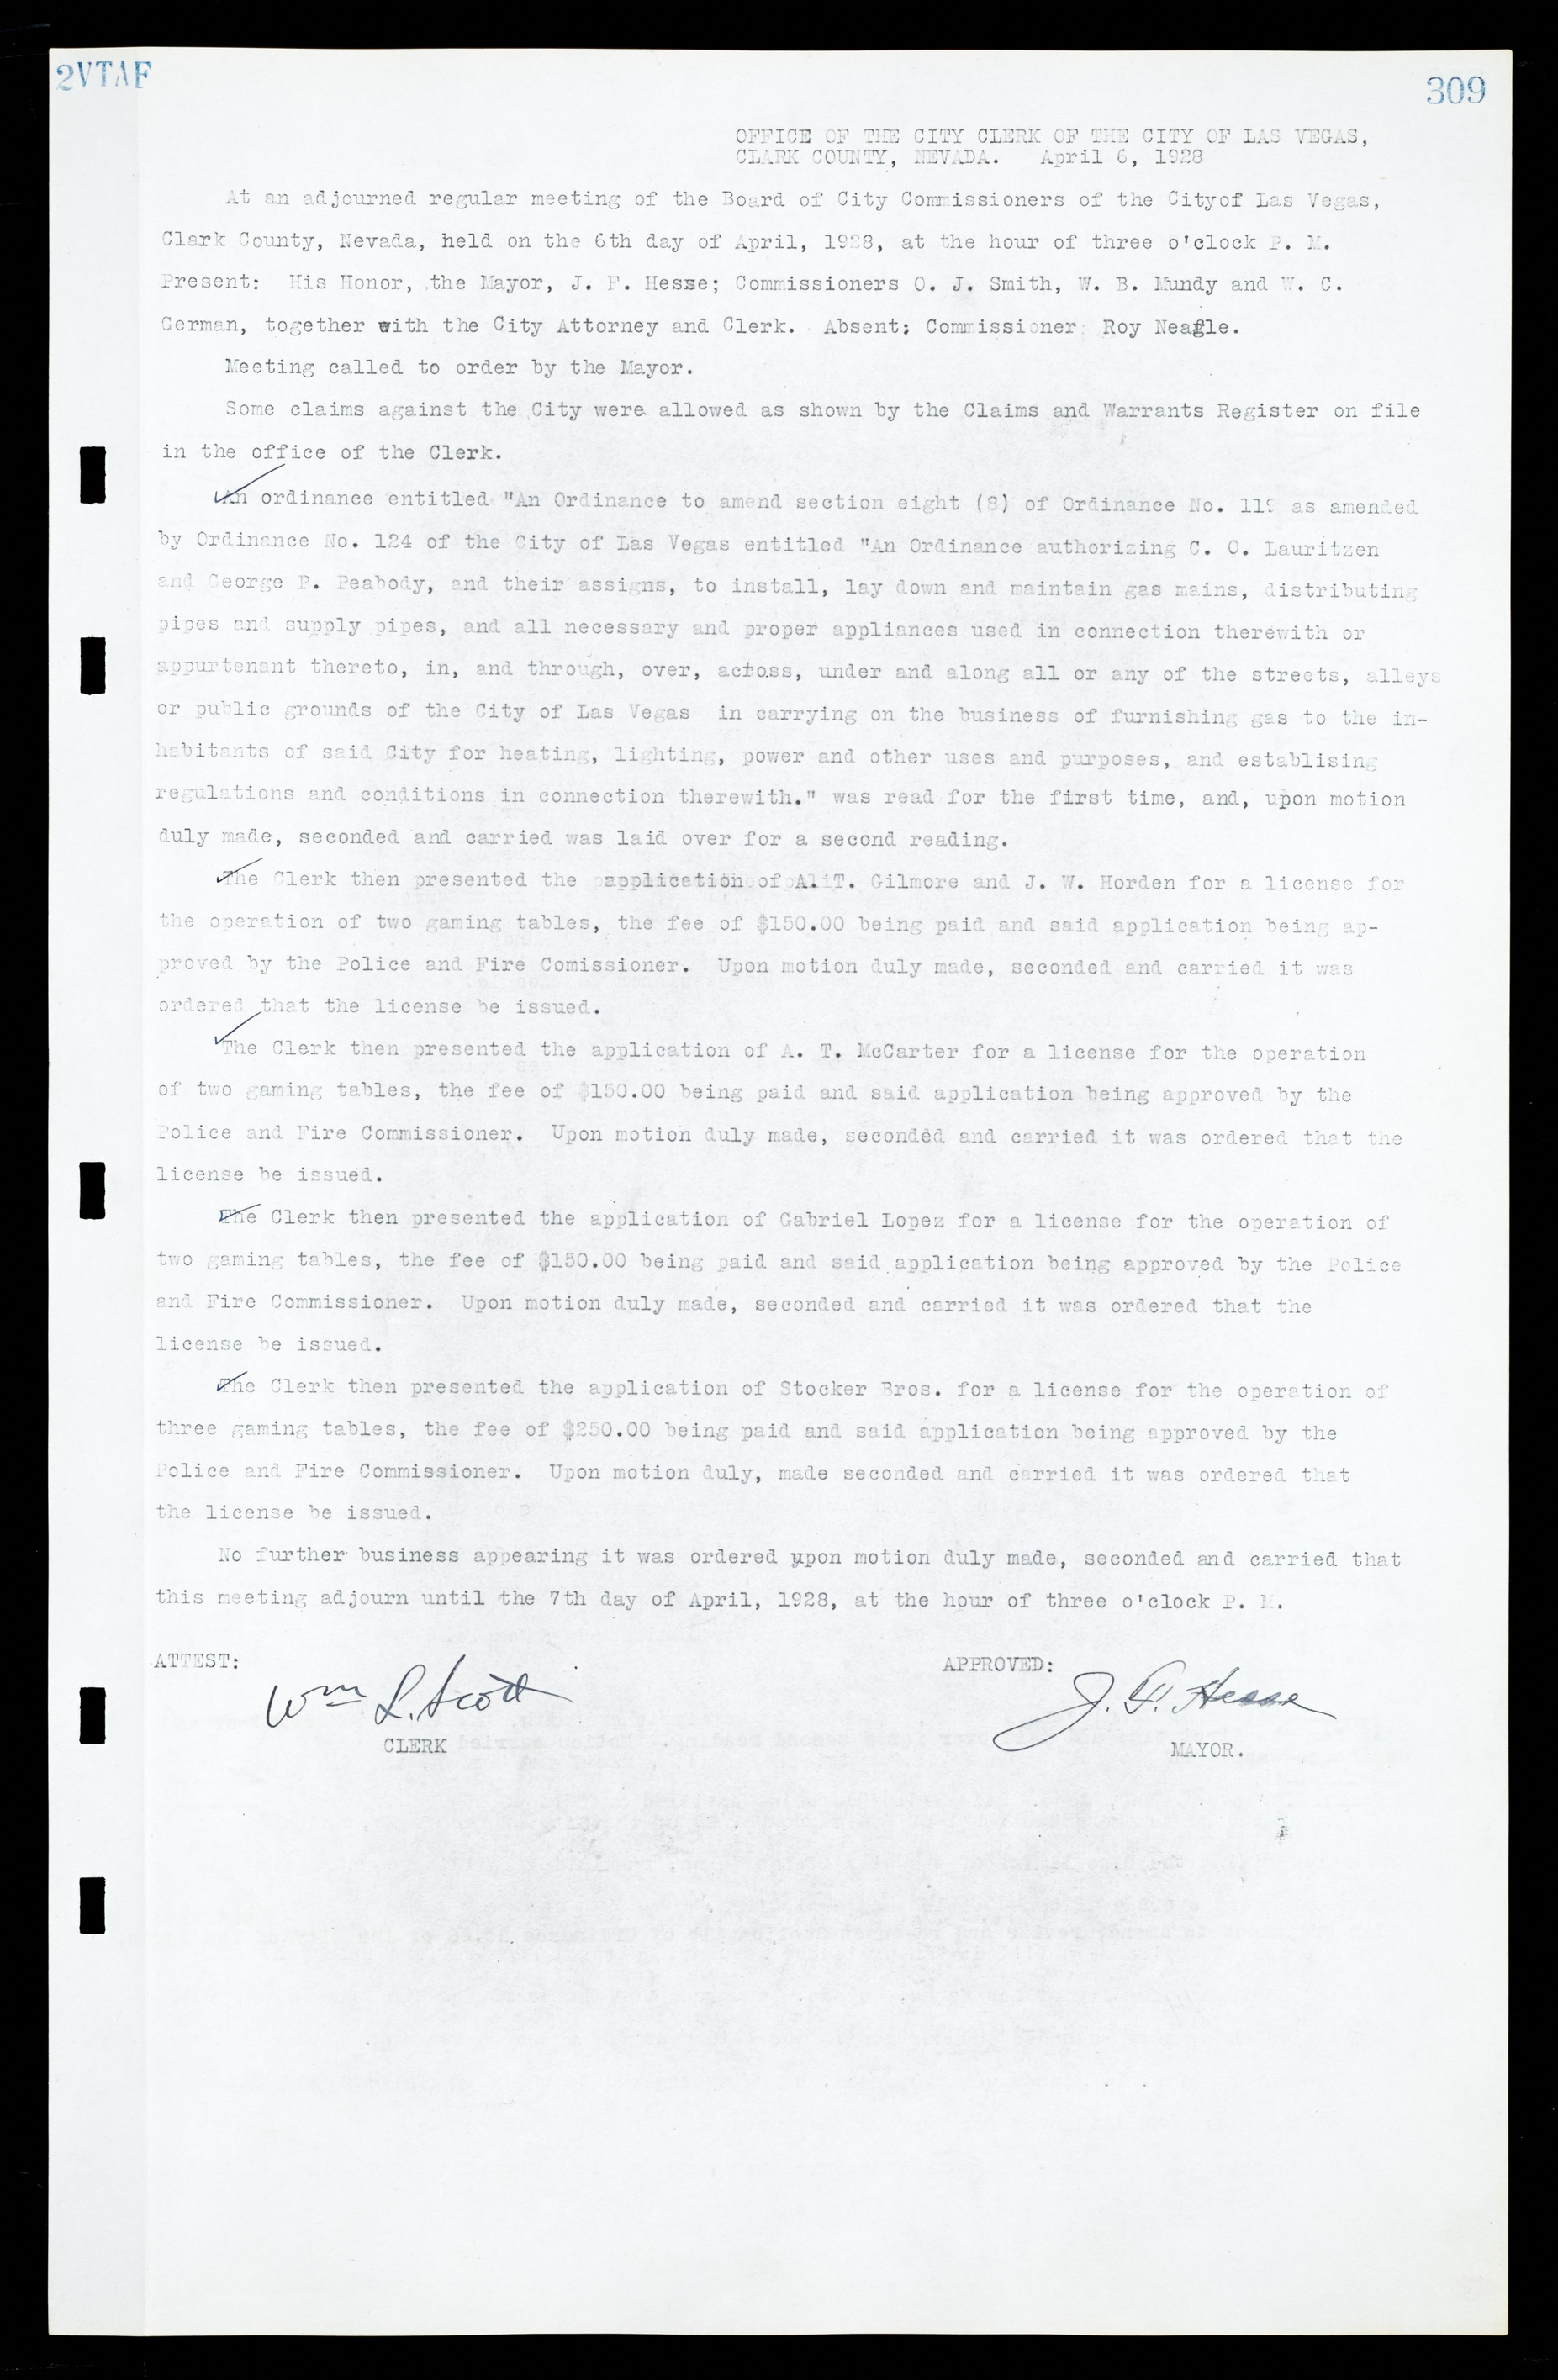 Las Vegas City Commission Minutes, March 1, 1922 to May 10, 1929, lvc000002-318